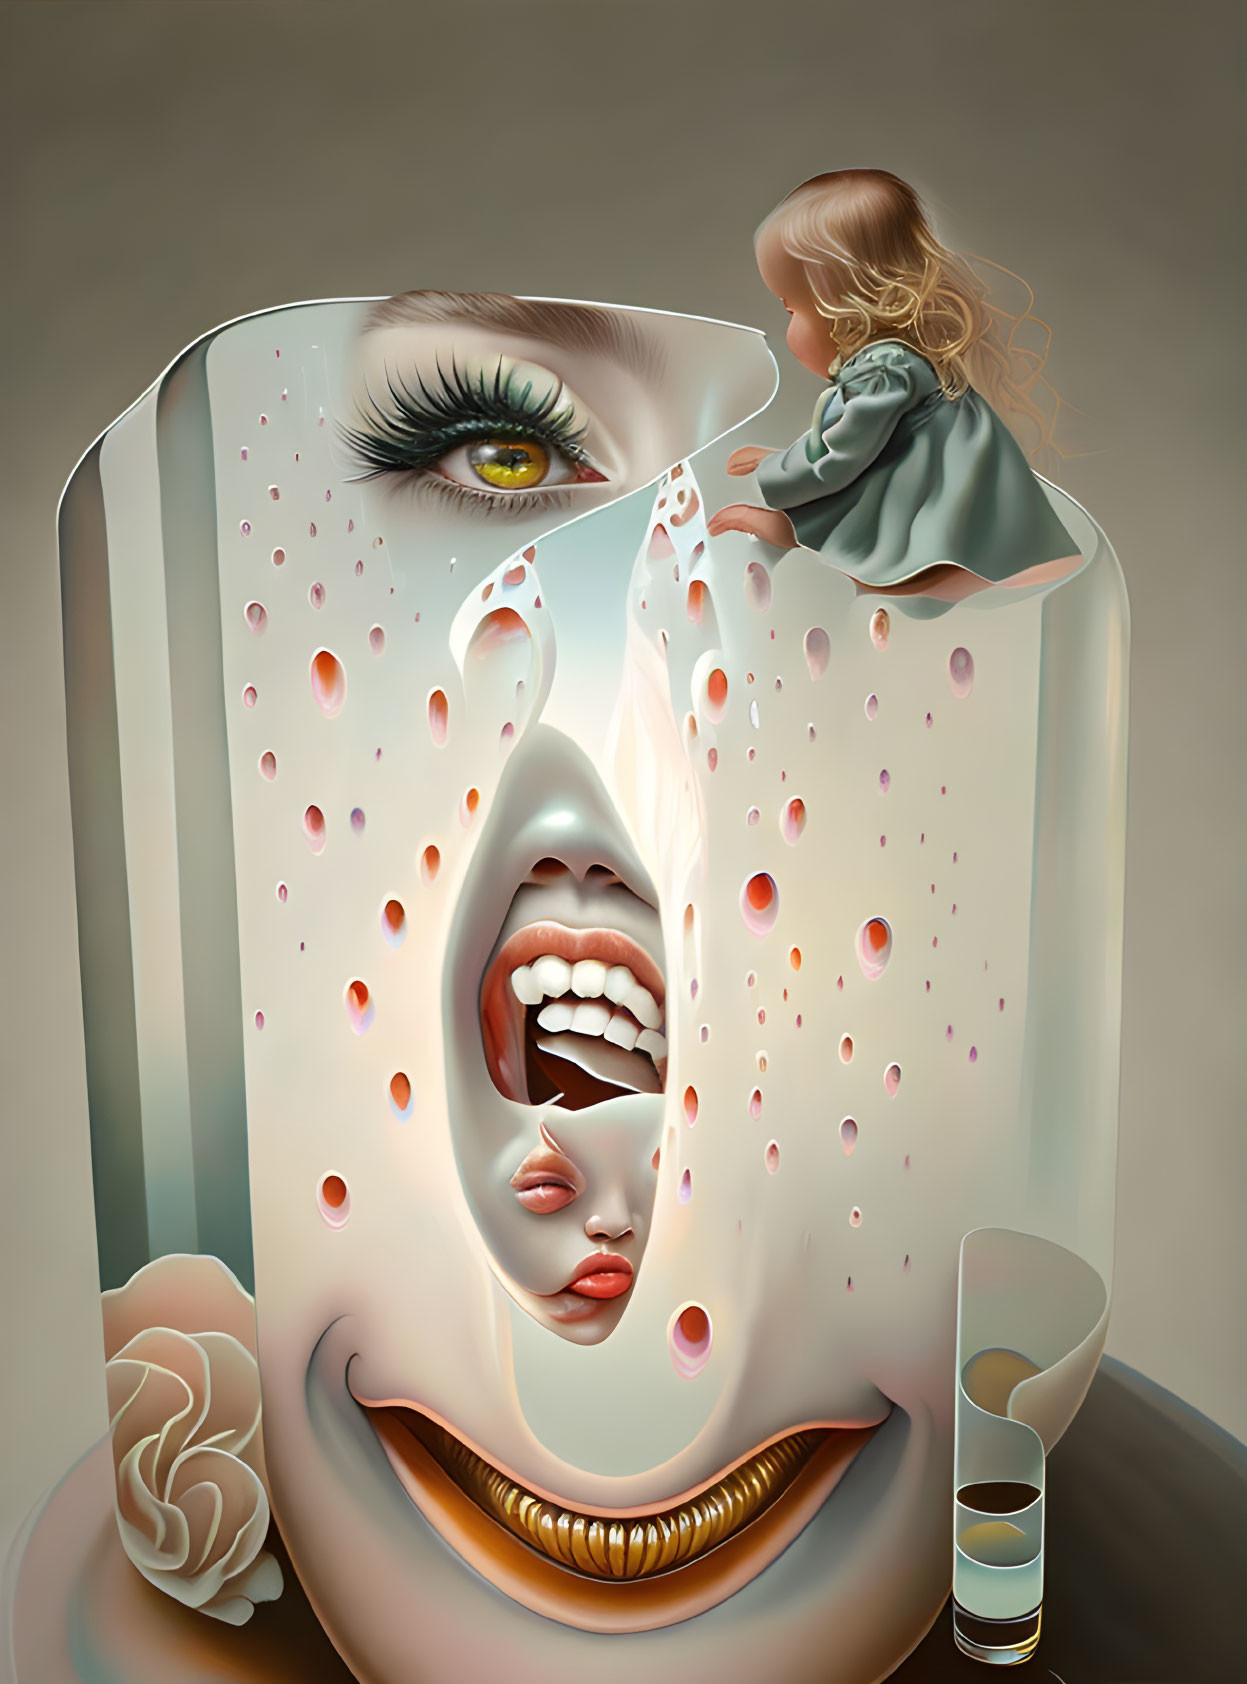 Layered Face with Child and Melting Features in Surreal Painting